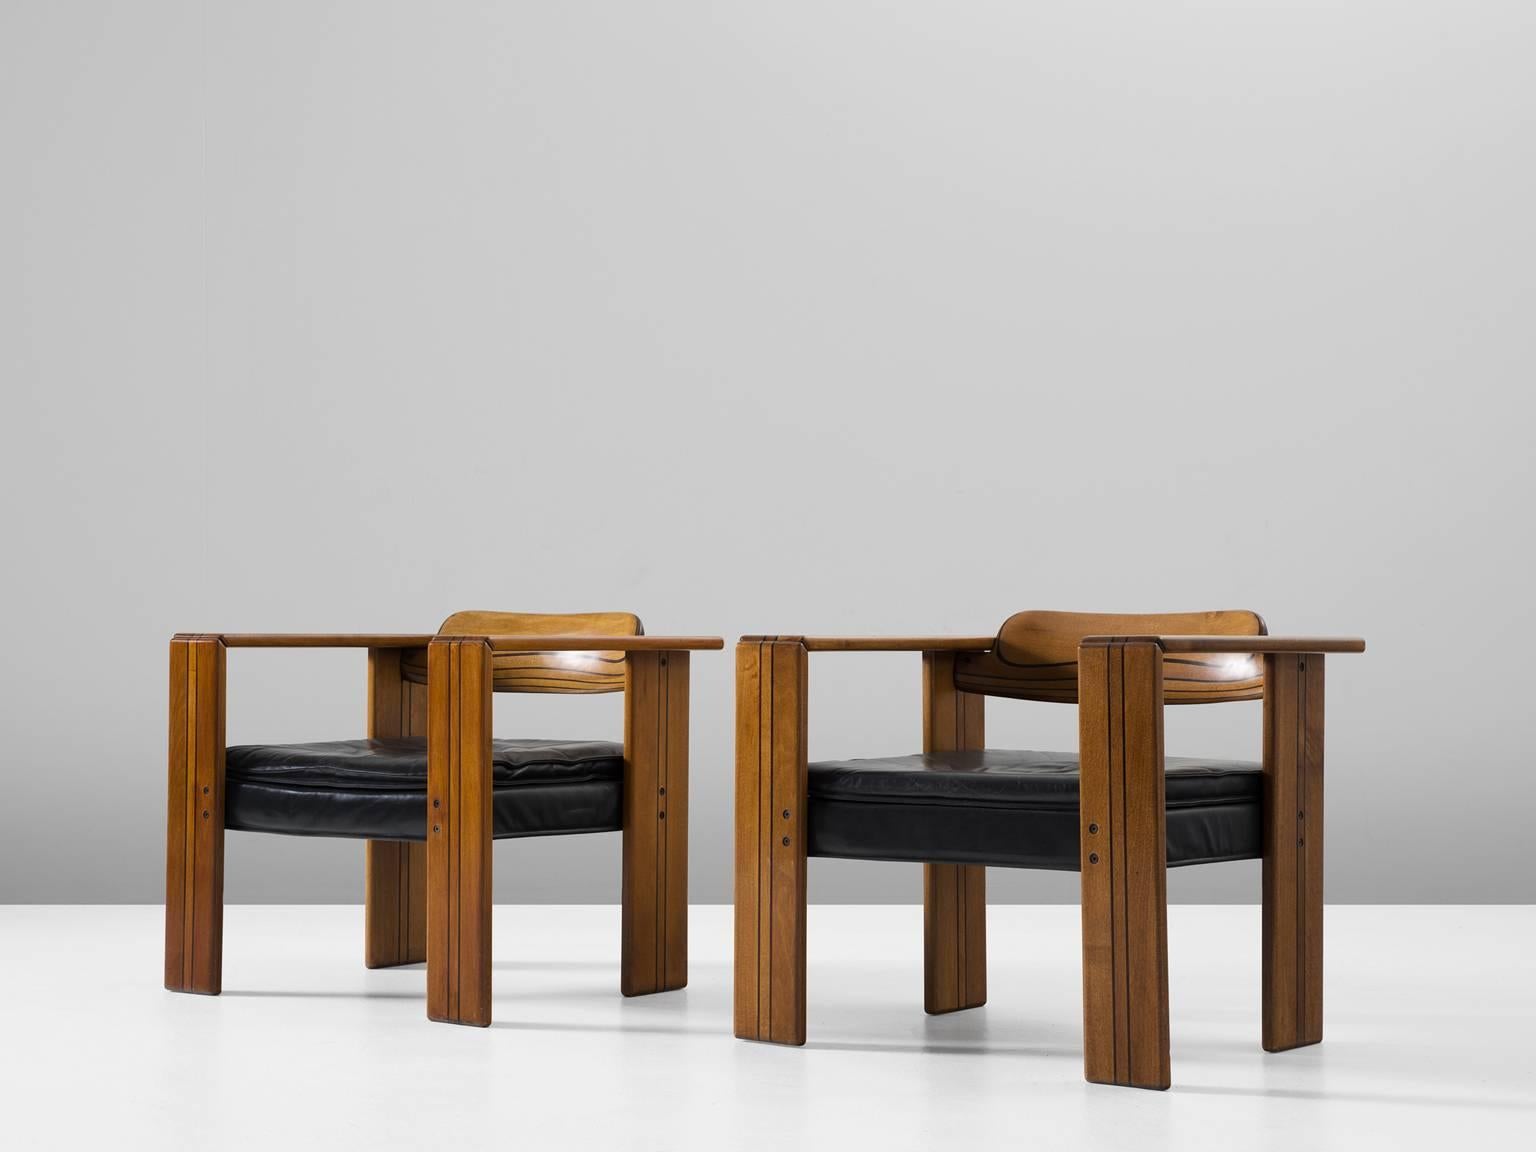 Set of two 'Artona' armchairs, in walnut and leather, by Afra & Tobia Scarpa for Maxalto, Italy, 1975. 

Pair of cubic Artona lounge chairs by Italian designer couple Afra and Tobia Scarpa. These chairs show absolute stunning craftsmanship.